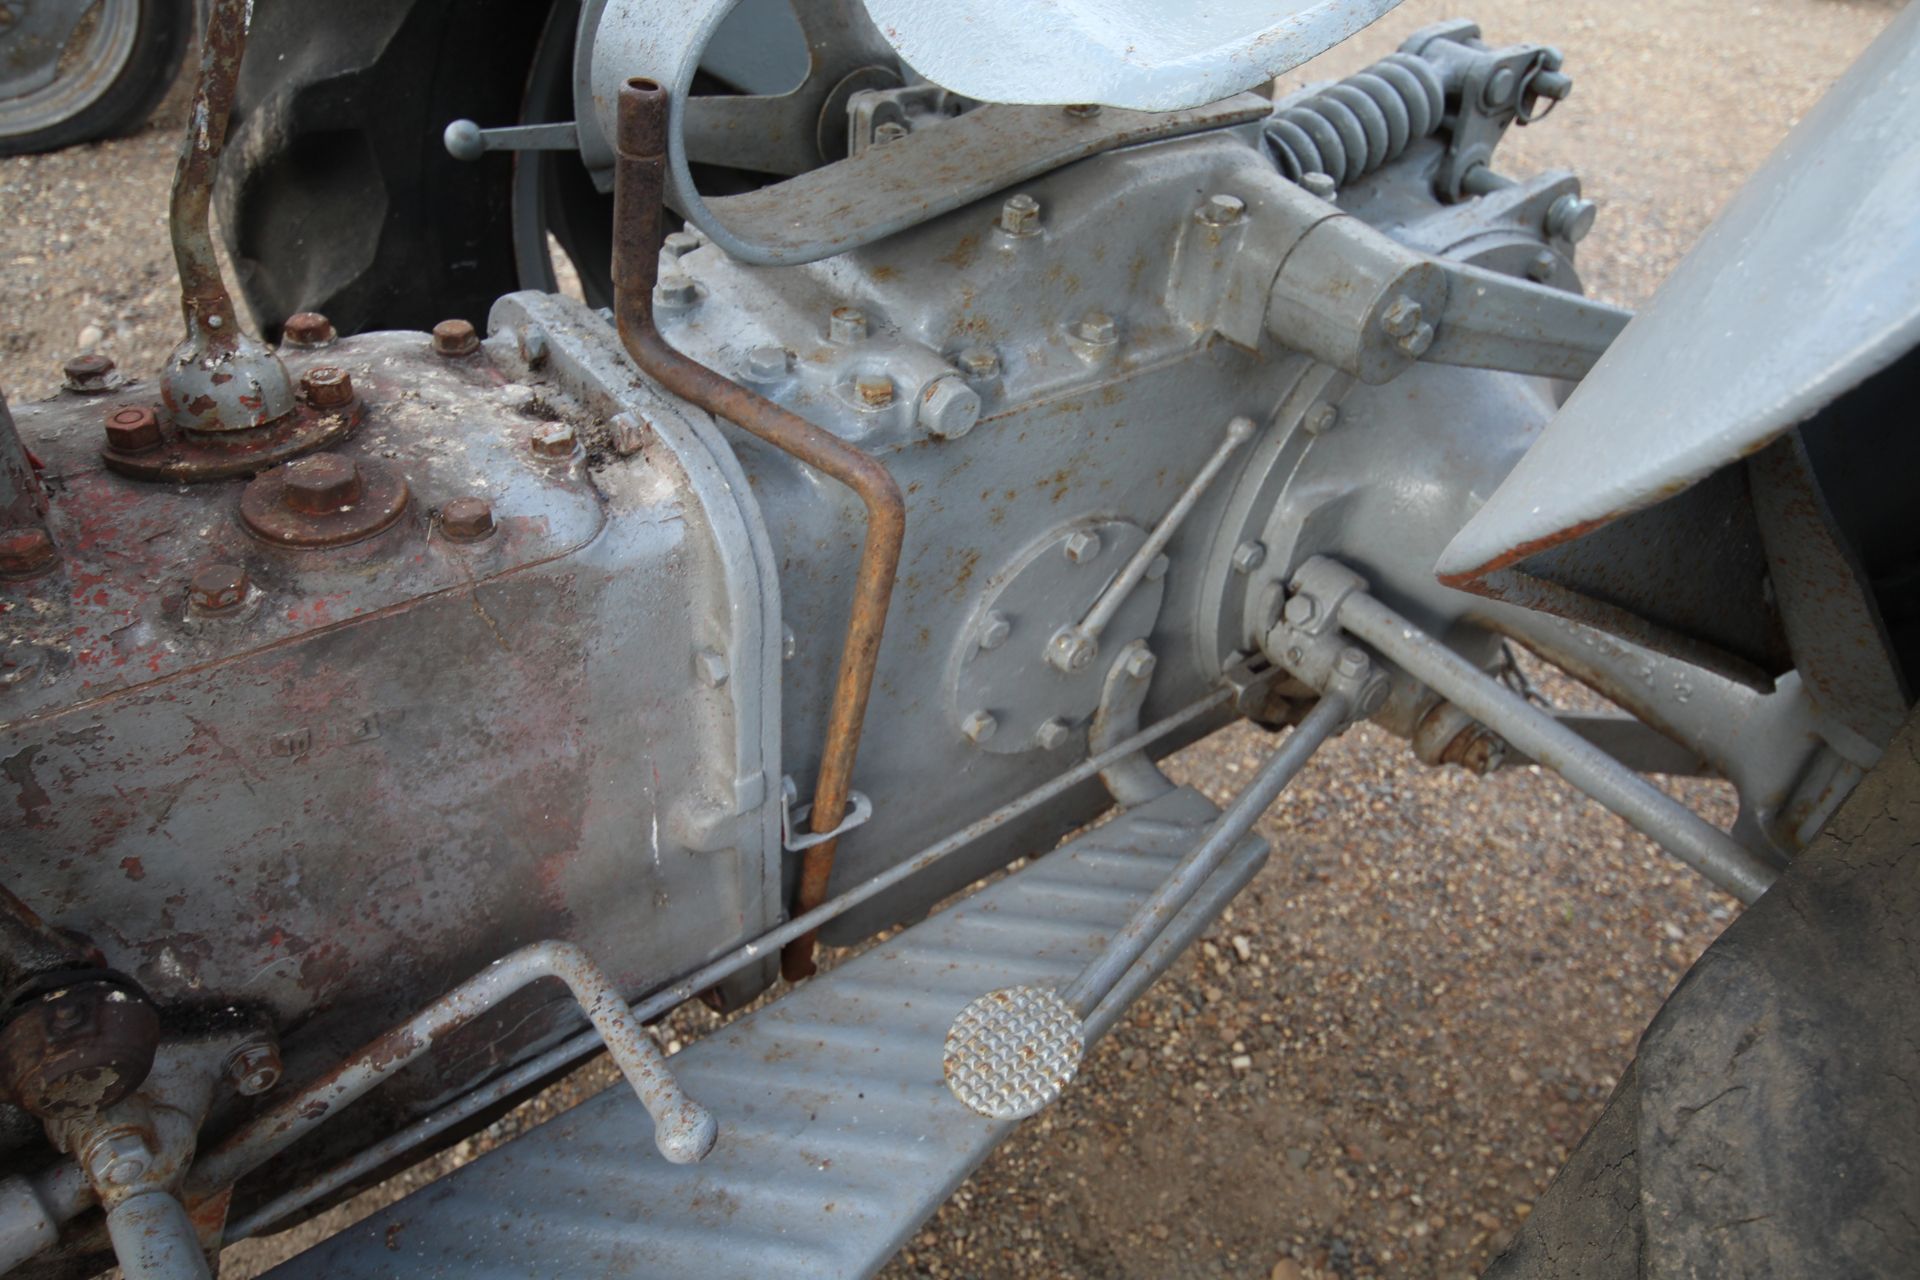 Ferguson TED 20 petrol/ TVO 2WD tractor. Has not been running recently. Key held. - Image 36 of 63